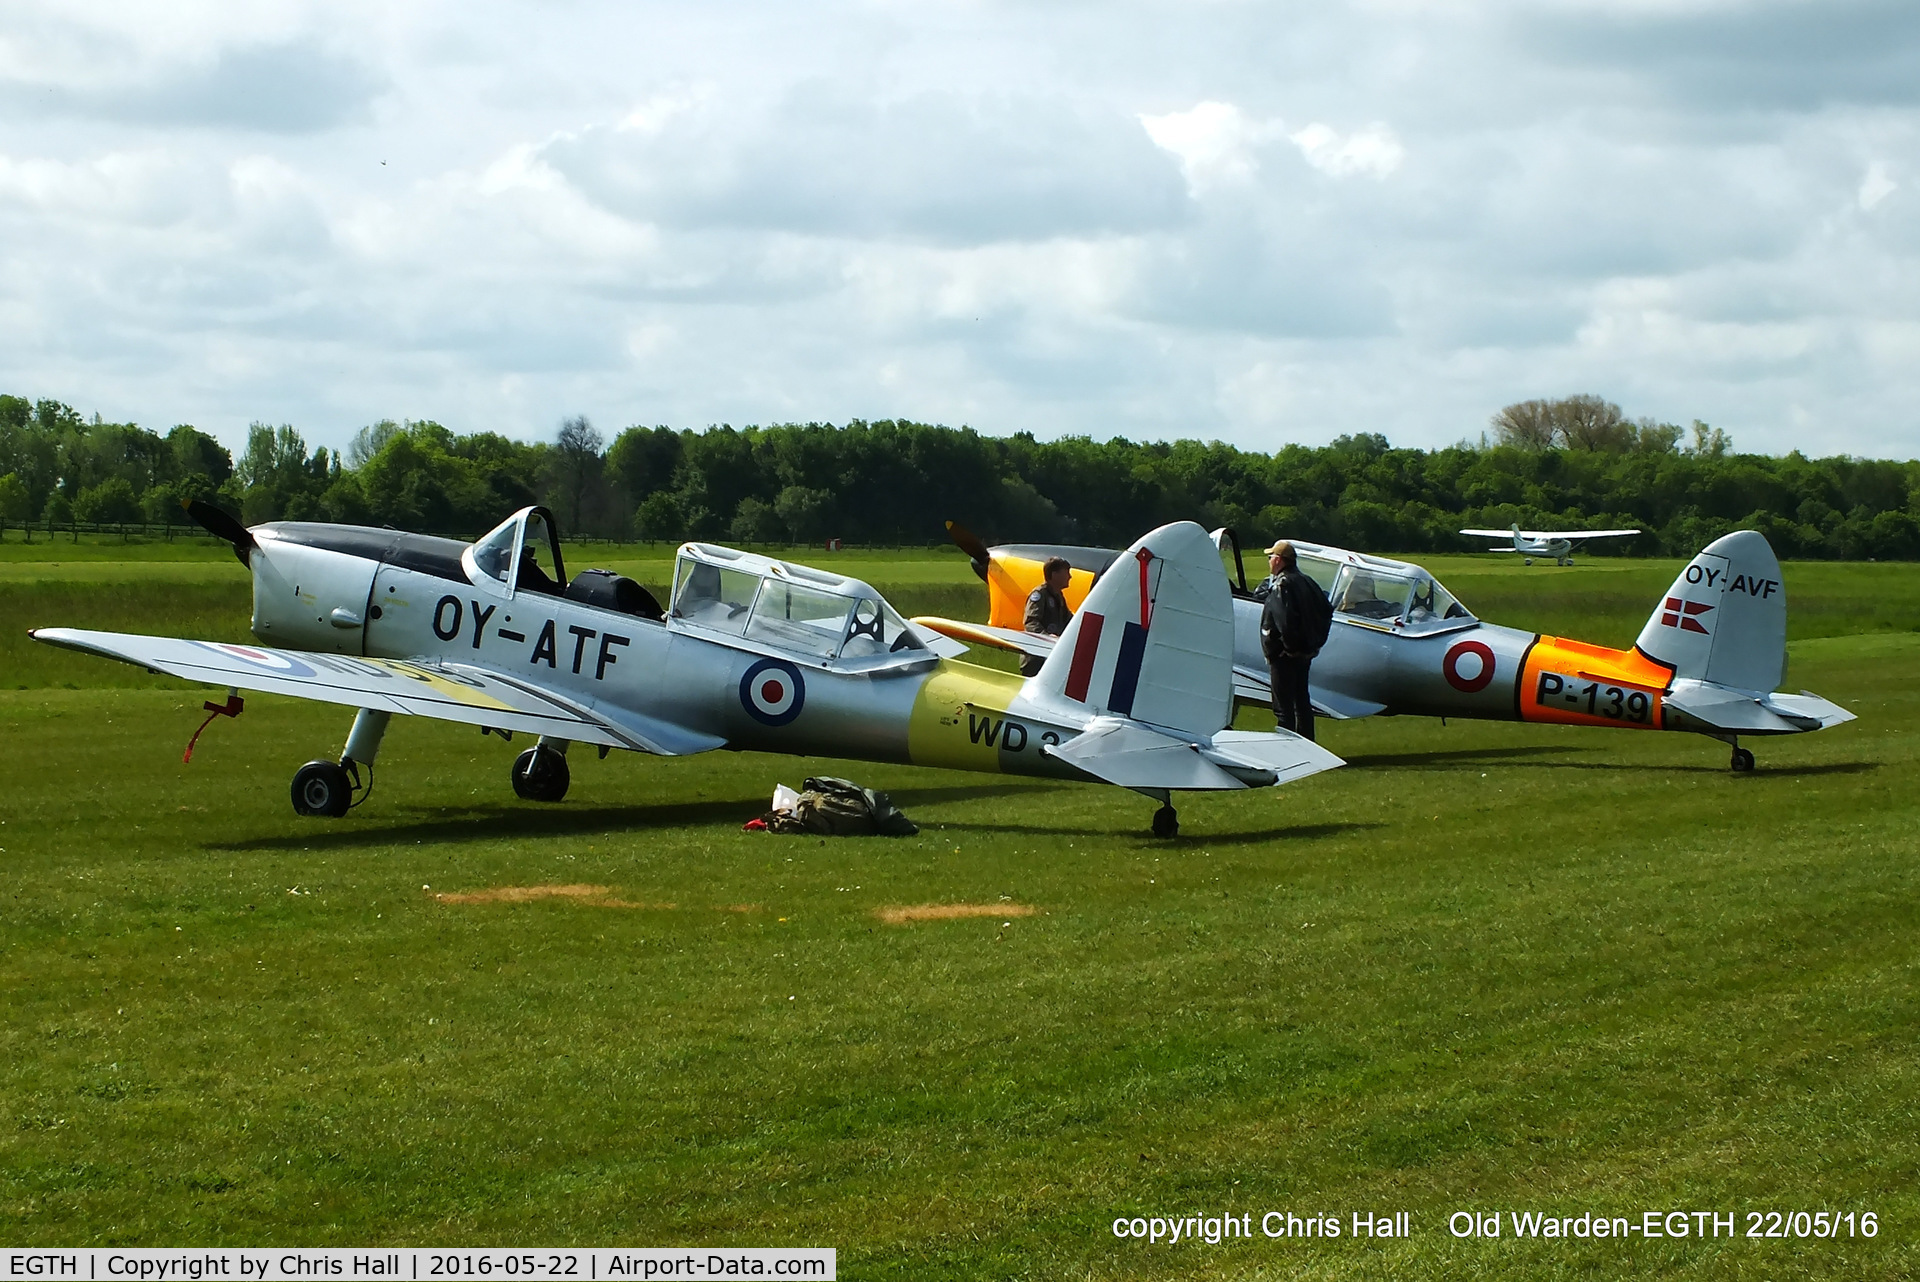 EGTH Airport - 70th Anniversary of the first flight of the de Havilland Chipmunk  Fly-In at Old Warden